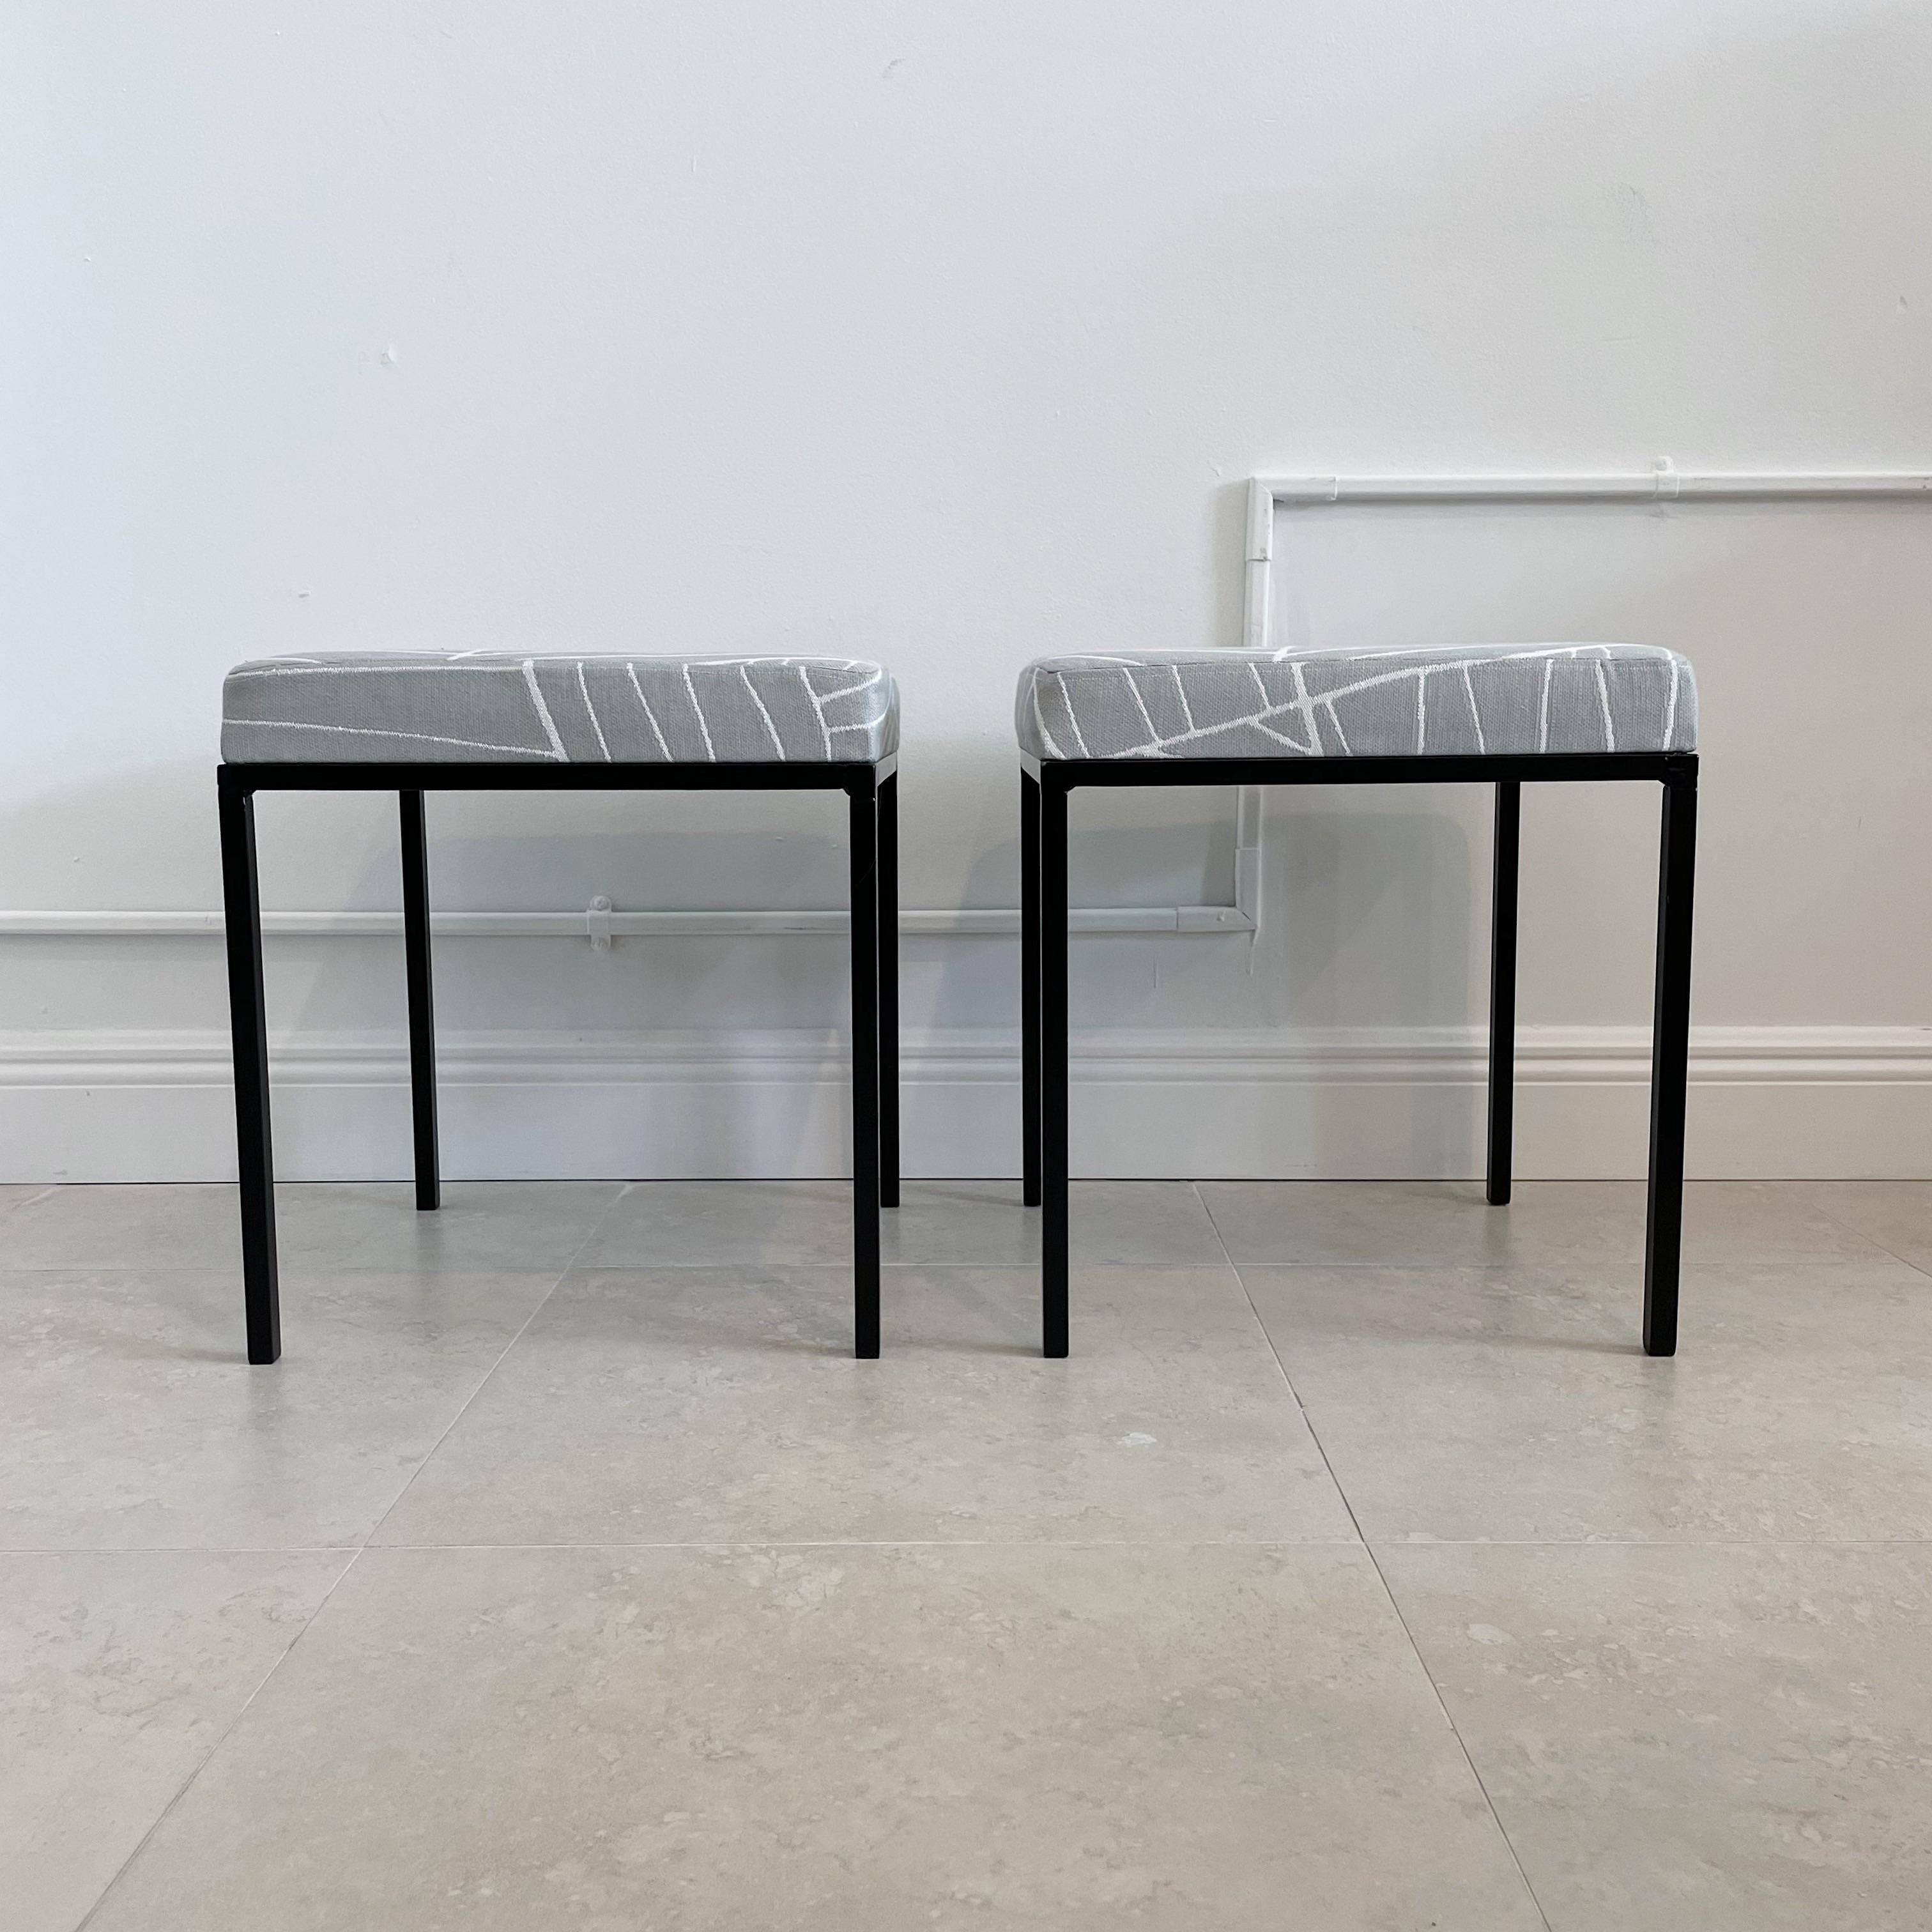 These are iron stools from the 1950s, which have been recently powder-coated in black and reupholstered with abstract palm frond outdoor fabric. The design of these stools is credited to Daryl Landrum for Avard, and they are reminiscent of the style